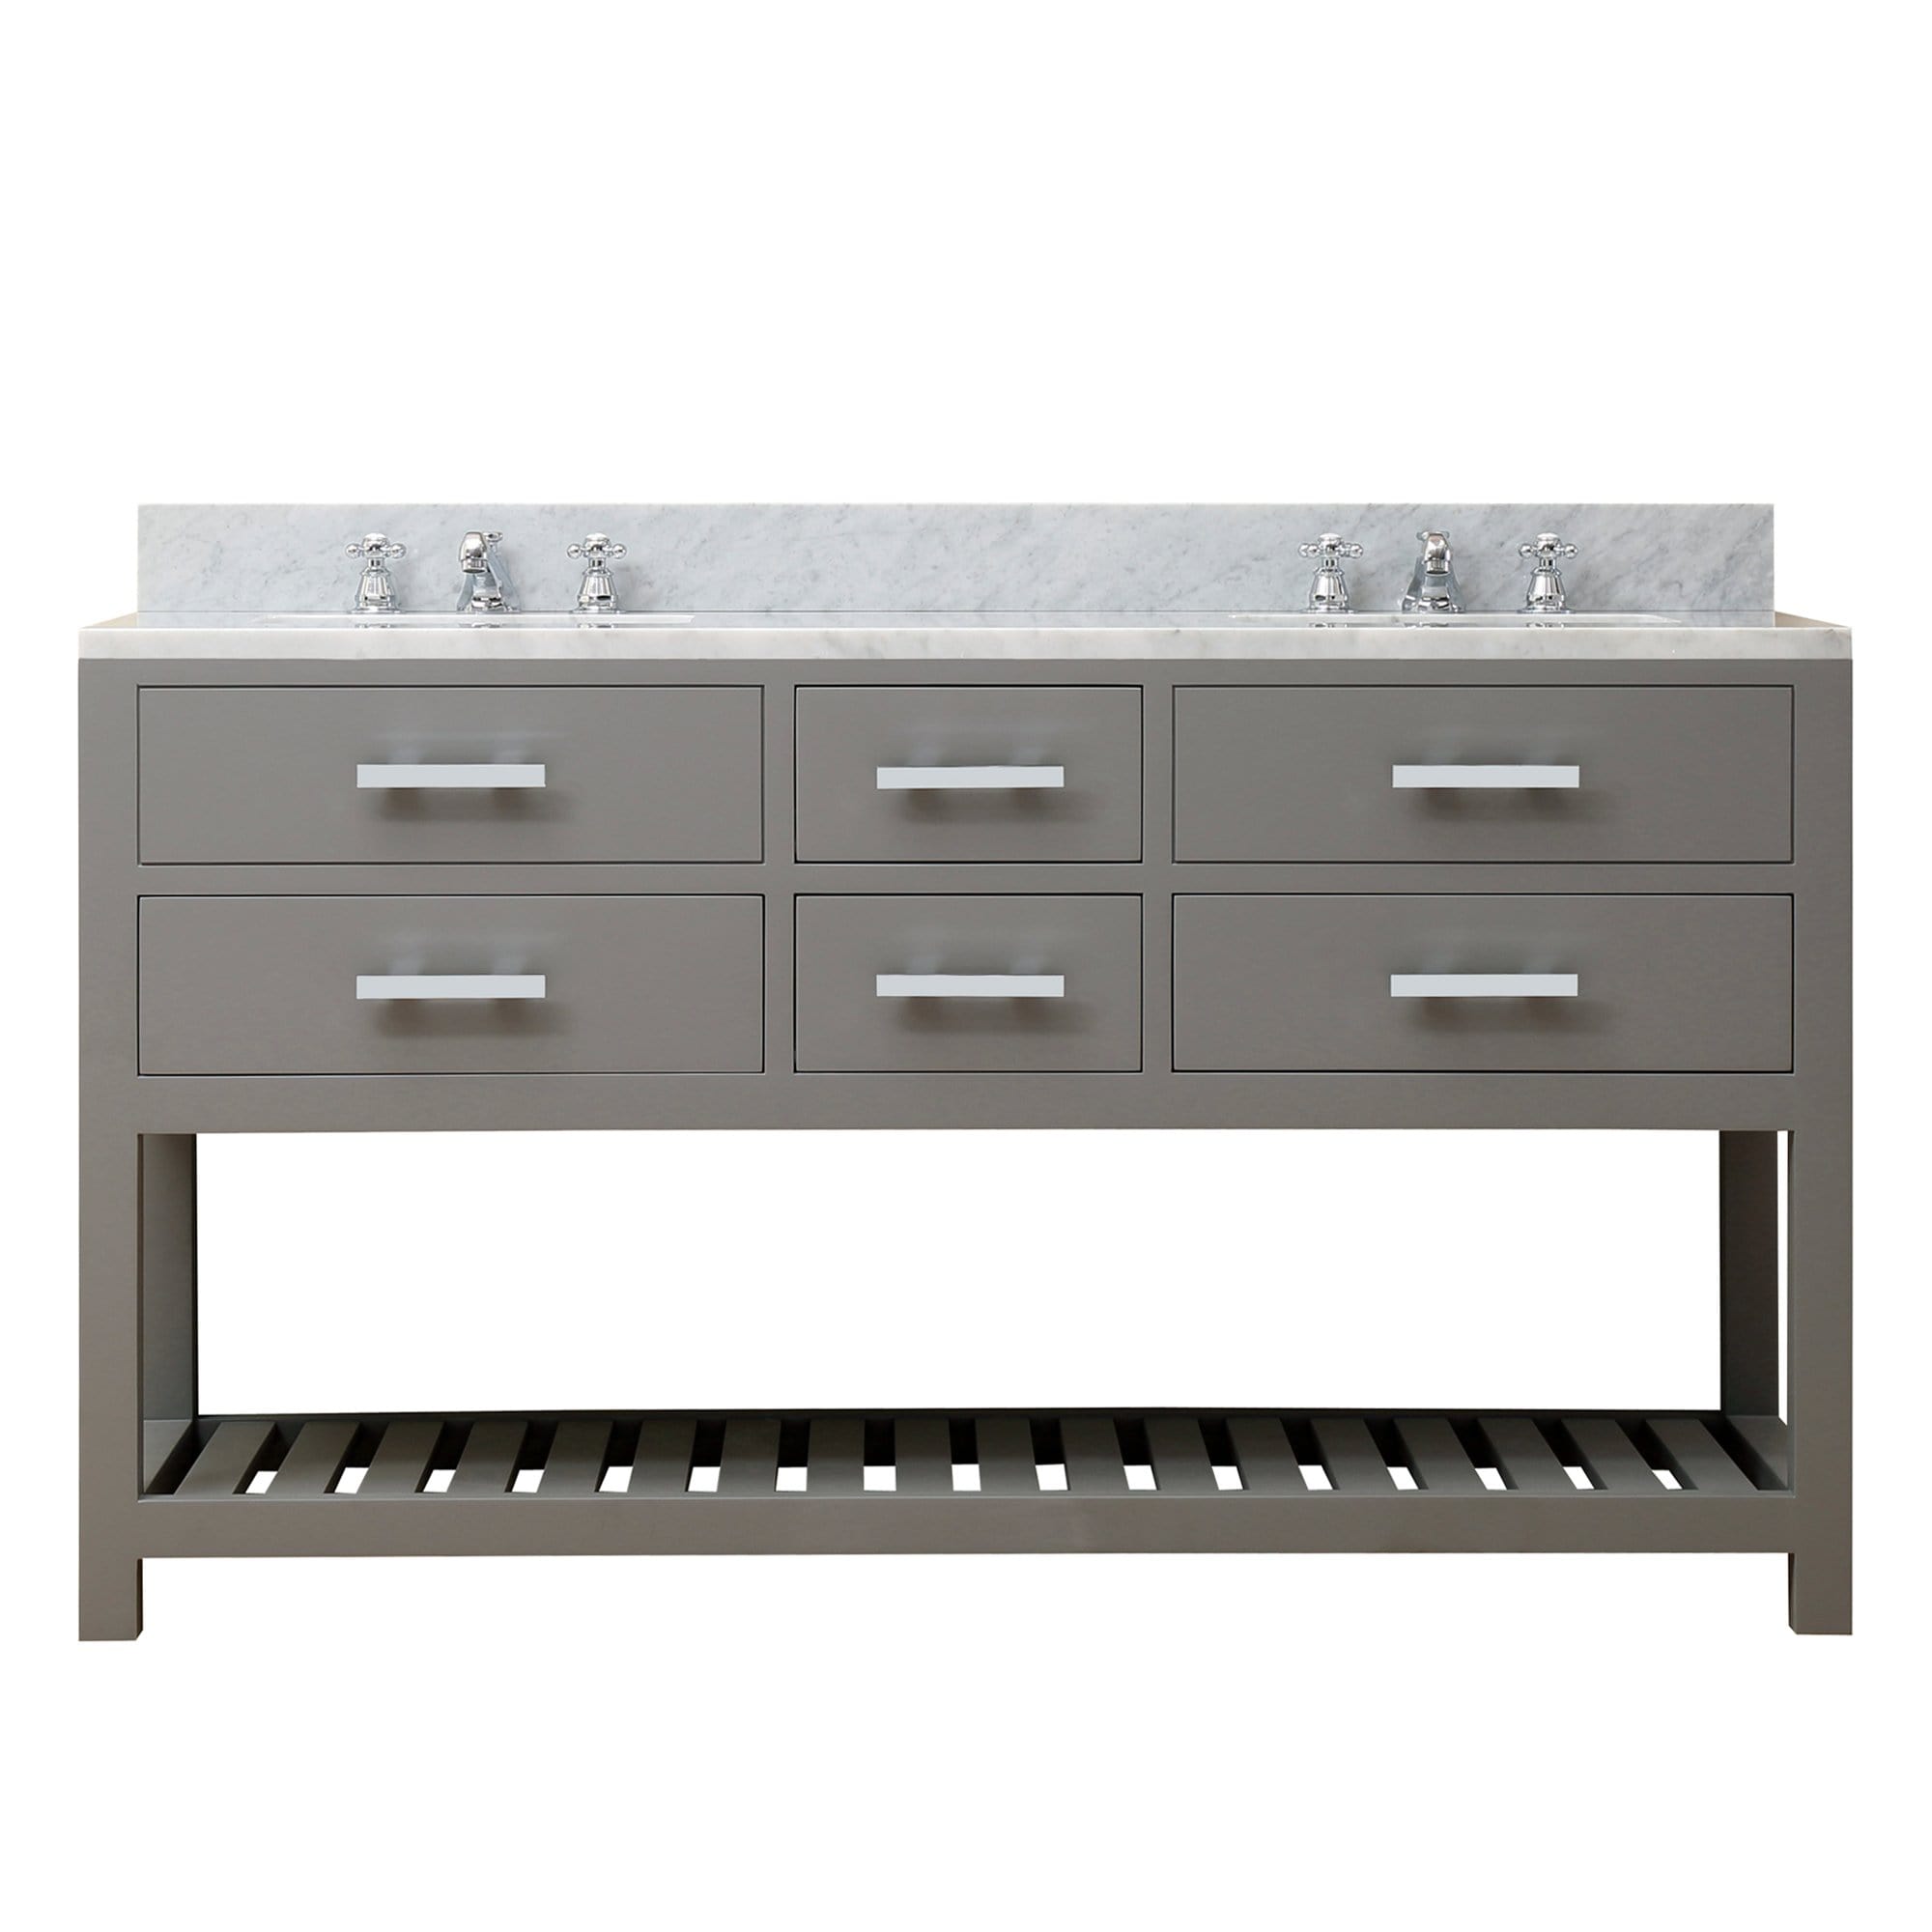 Water Creation 60 Inch Cashmere Grey Double Sink Bathroom Vanity With Faucet From The Madalyn Collection - Molaix700621683254Bathroom vanityMA60CW01CG-000BX0901